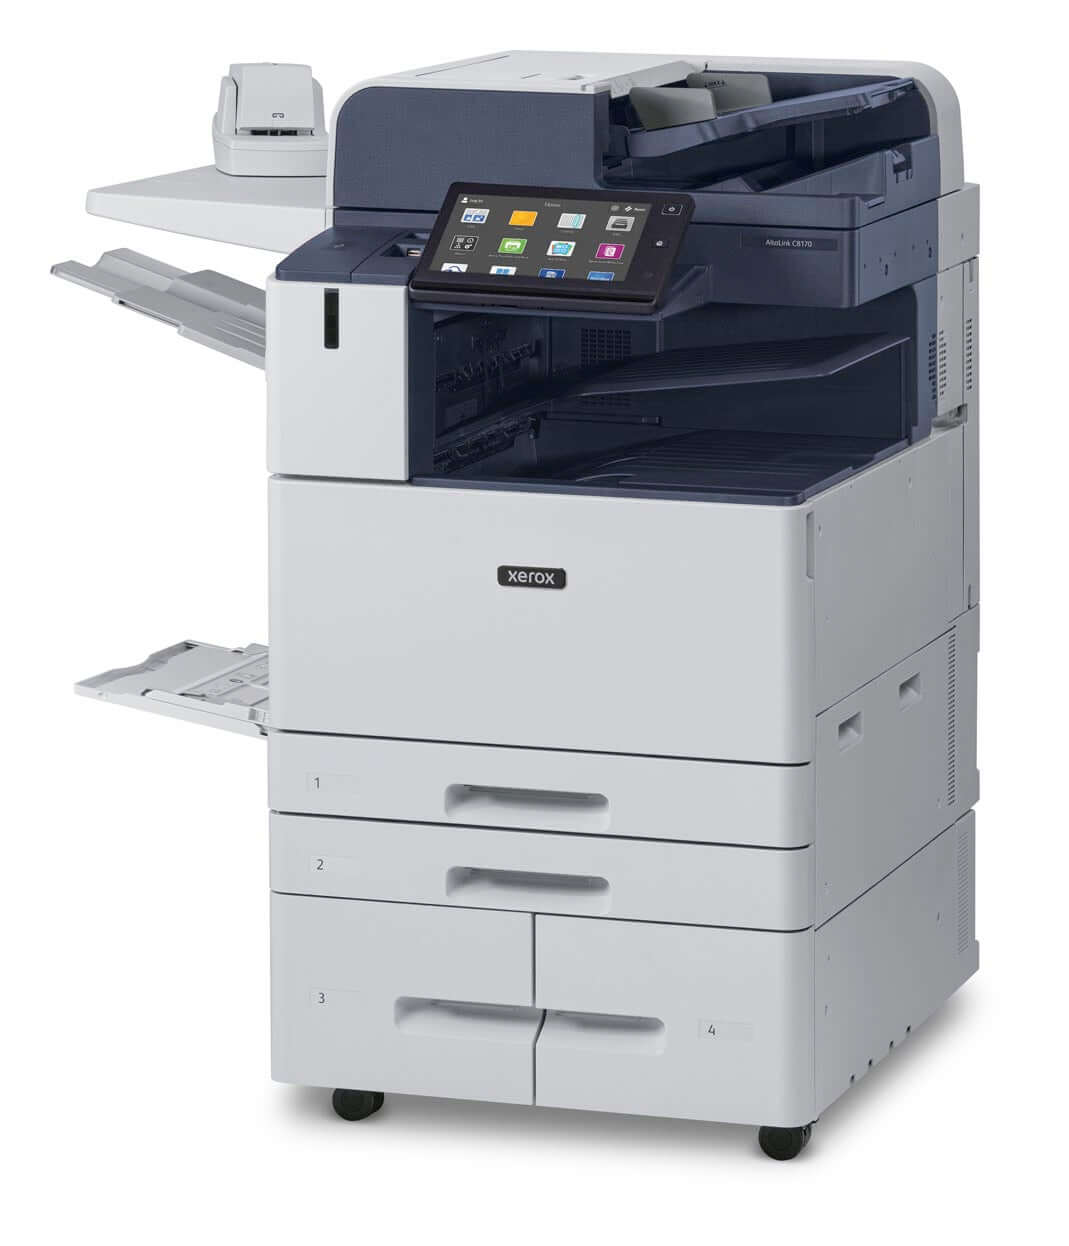 Xerox AltaLink C8130 A3 Colour Multi-Function Printer - 3,140 Paper Supply